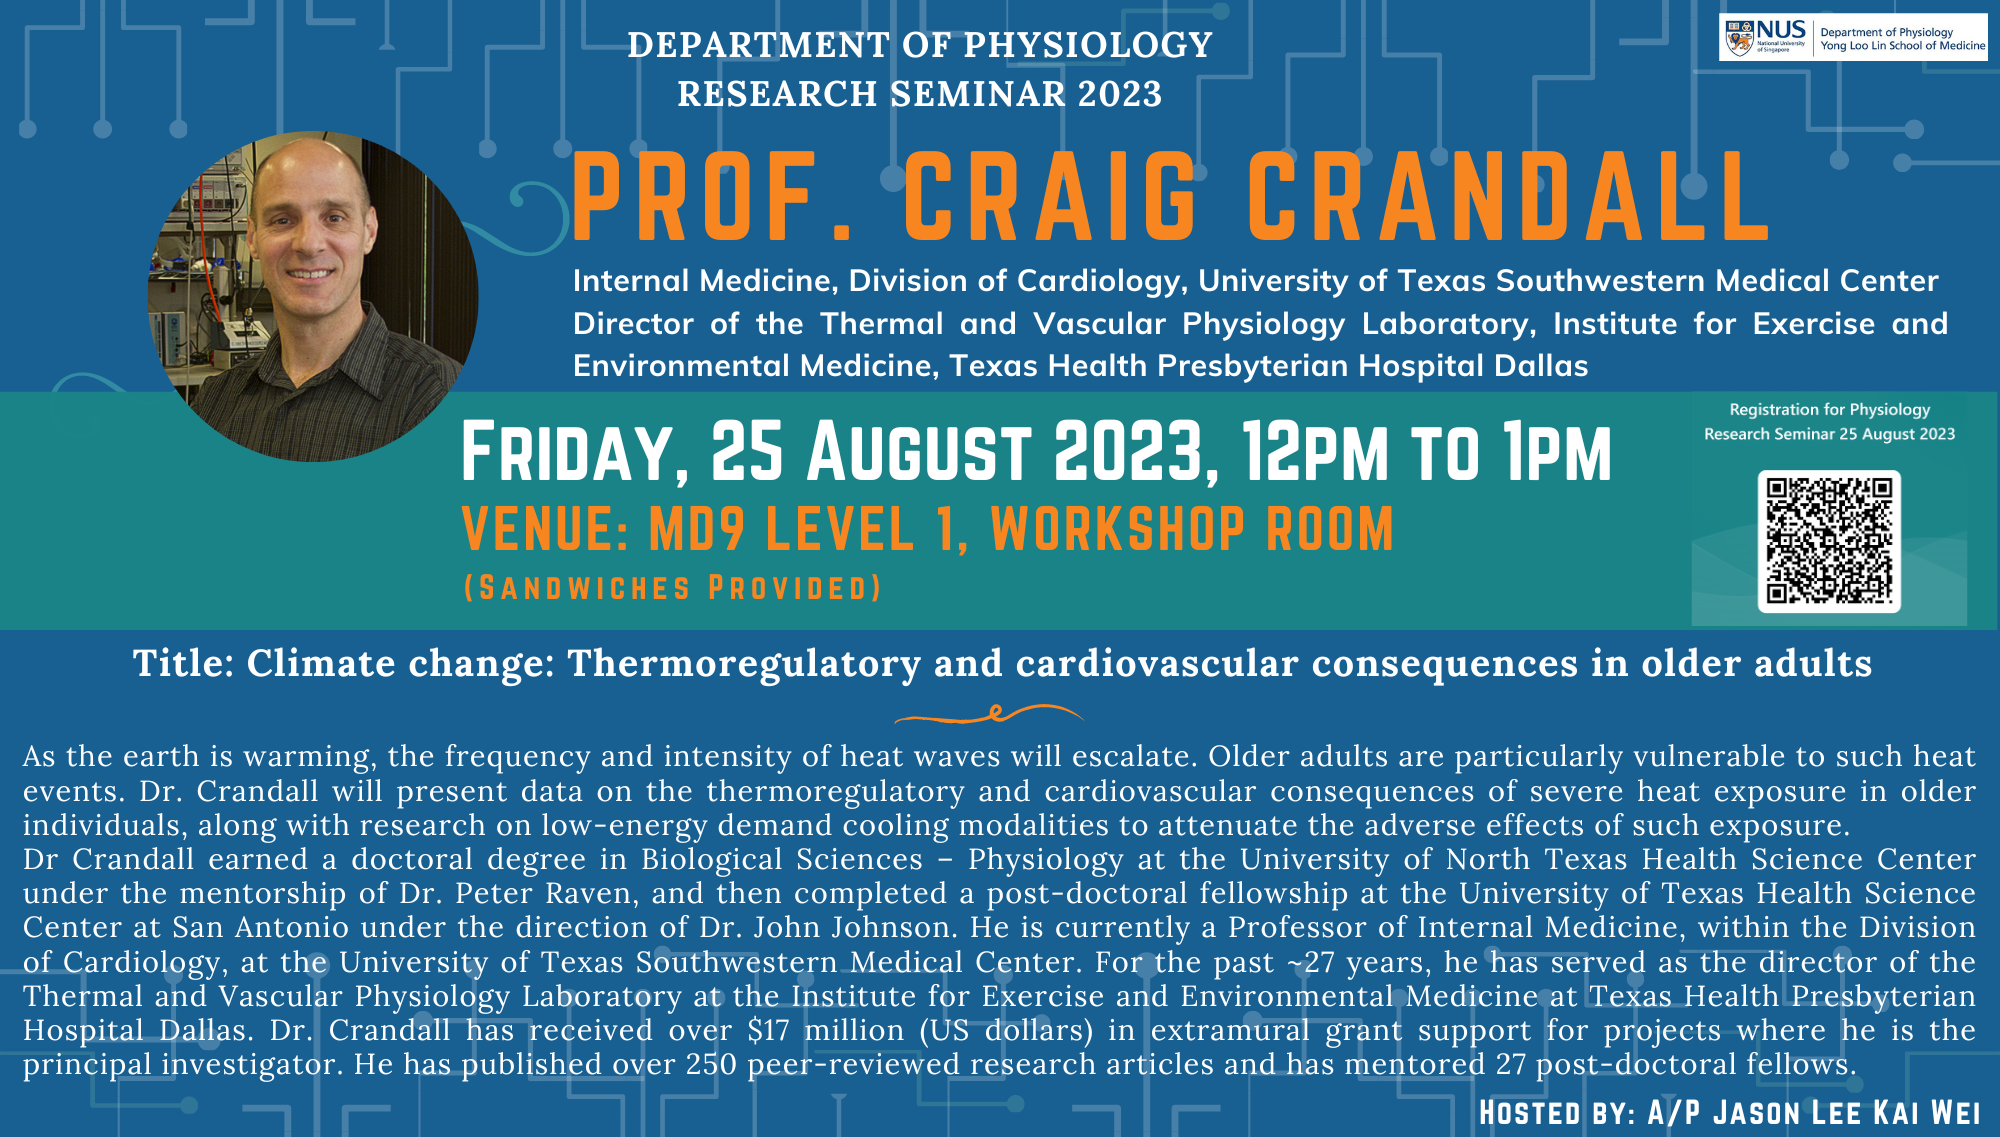 Physiology Research Seminar 25 August 2023